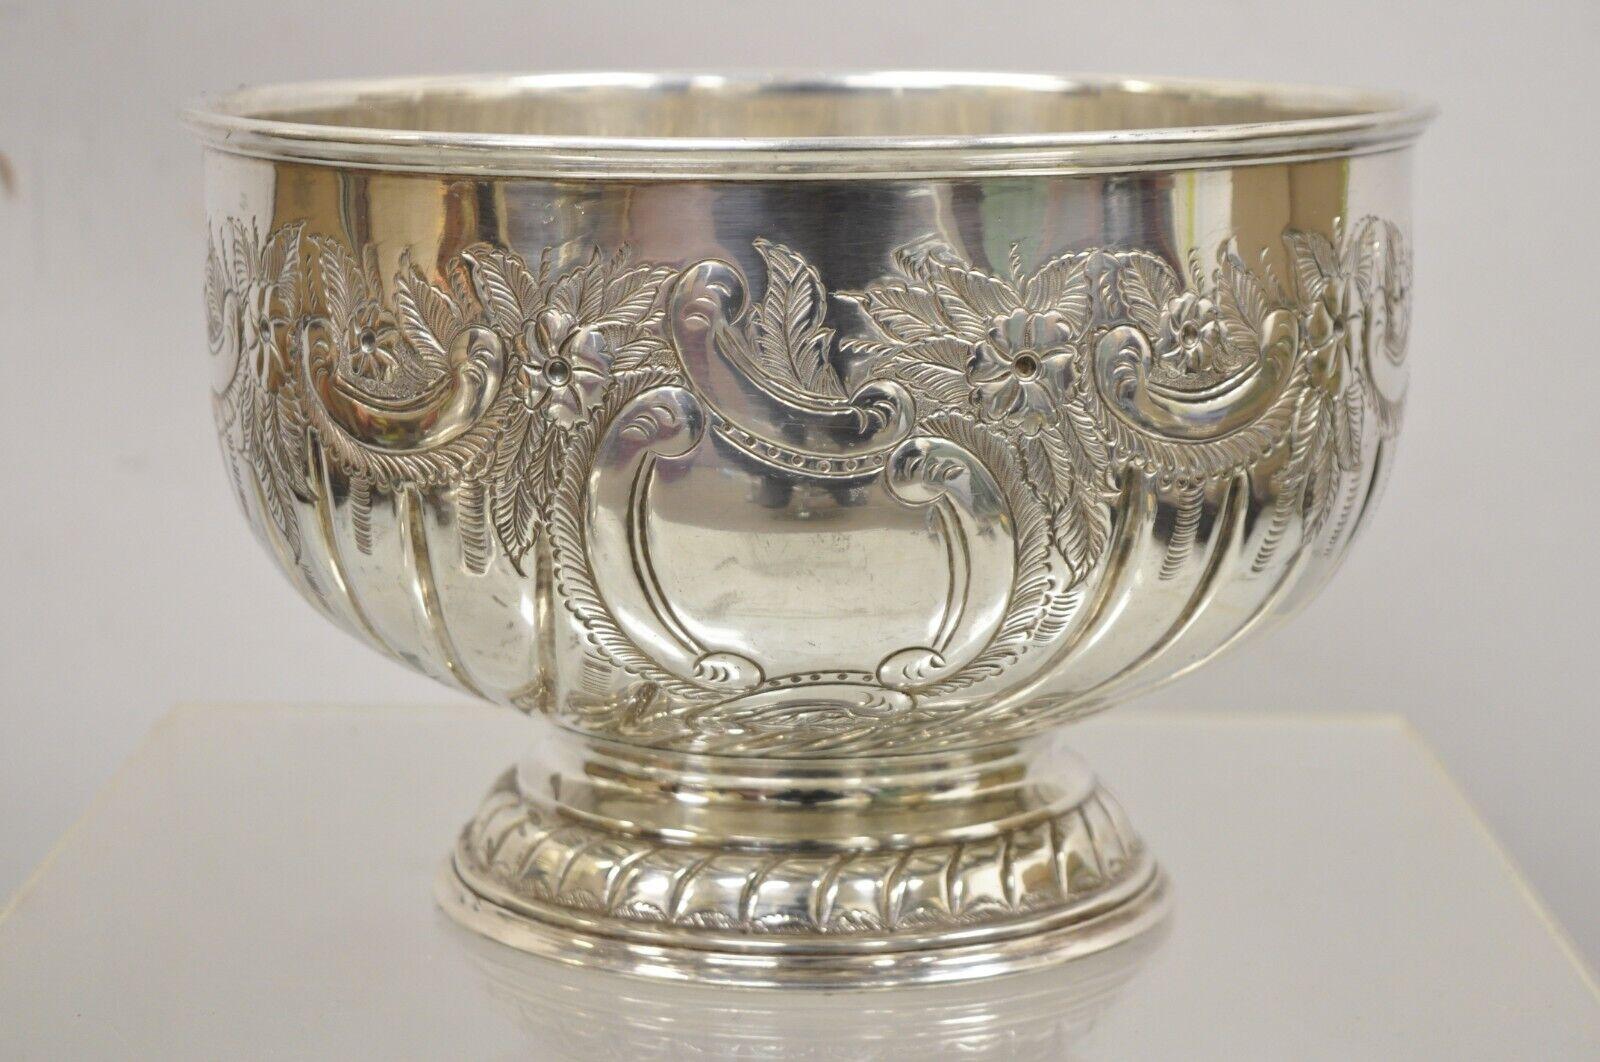 Sheffield silver plate repousse punch bowl champagne wine chiller bucket. Circa 1900. Measurements: 8